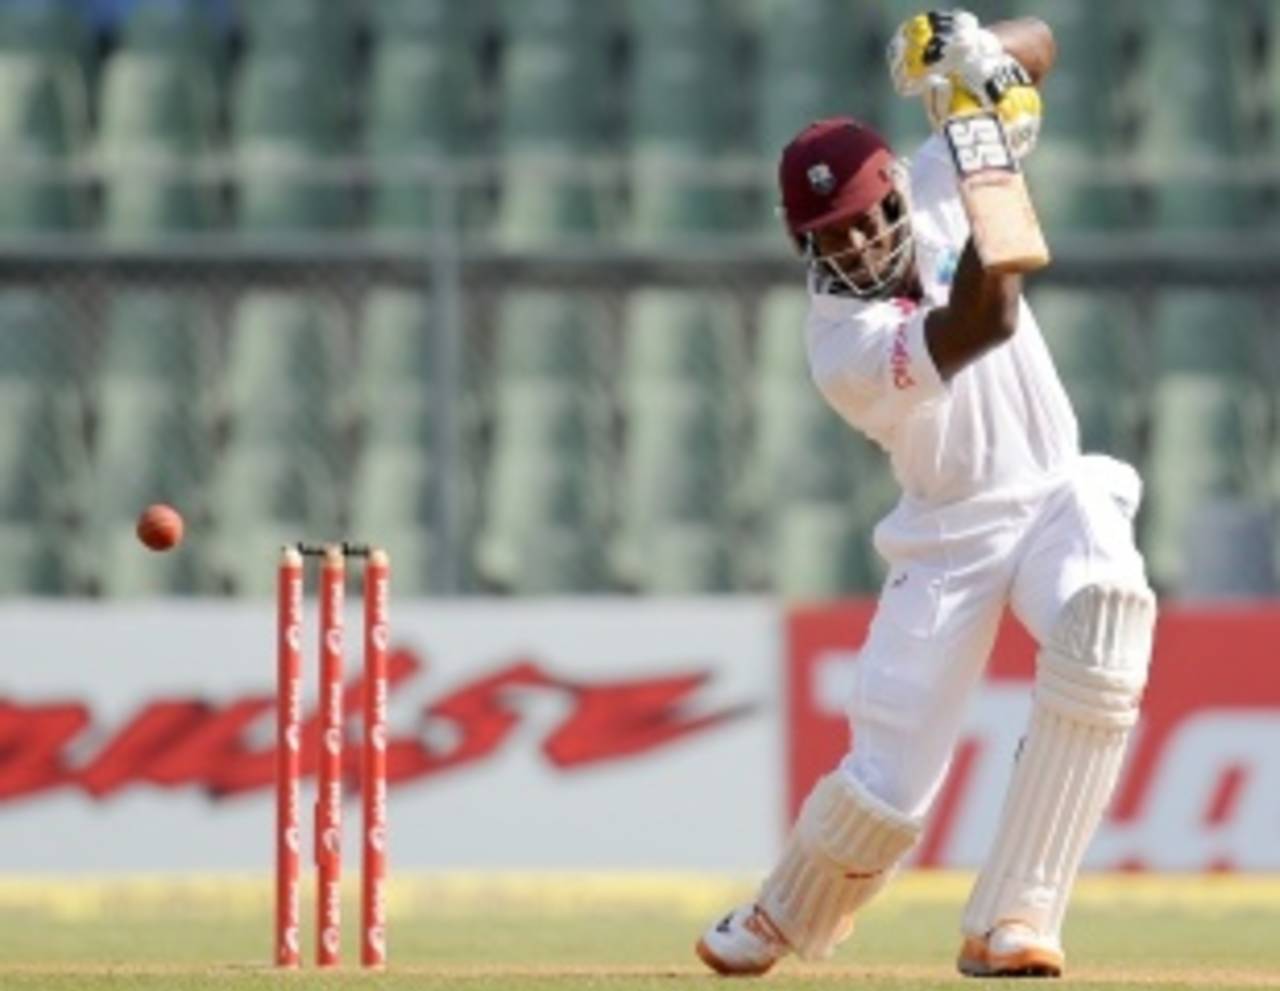 Kirk Edwards drives during his innings of 86, India v West Indies, 3rd Test, Mumbai, 2nd day, November 23, 2011